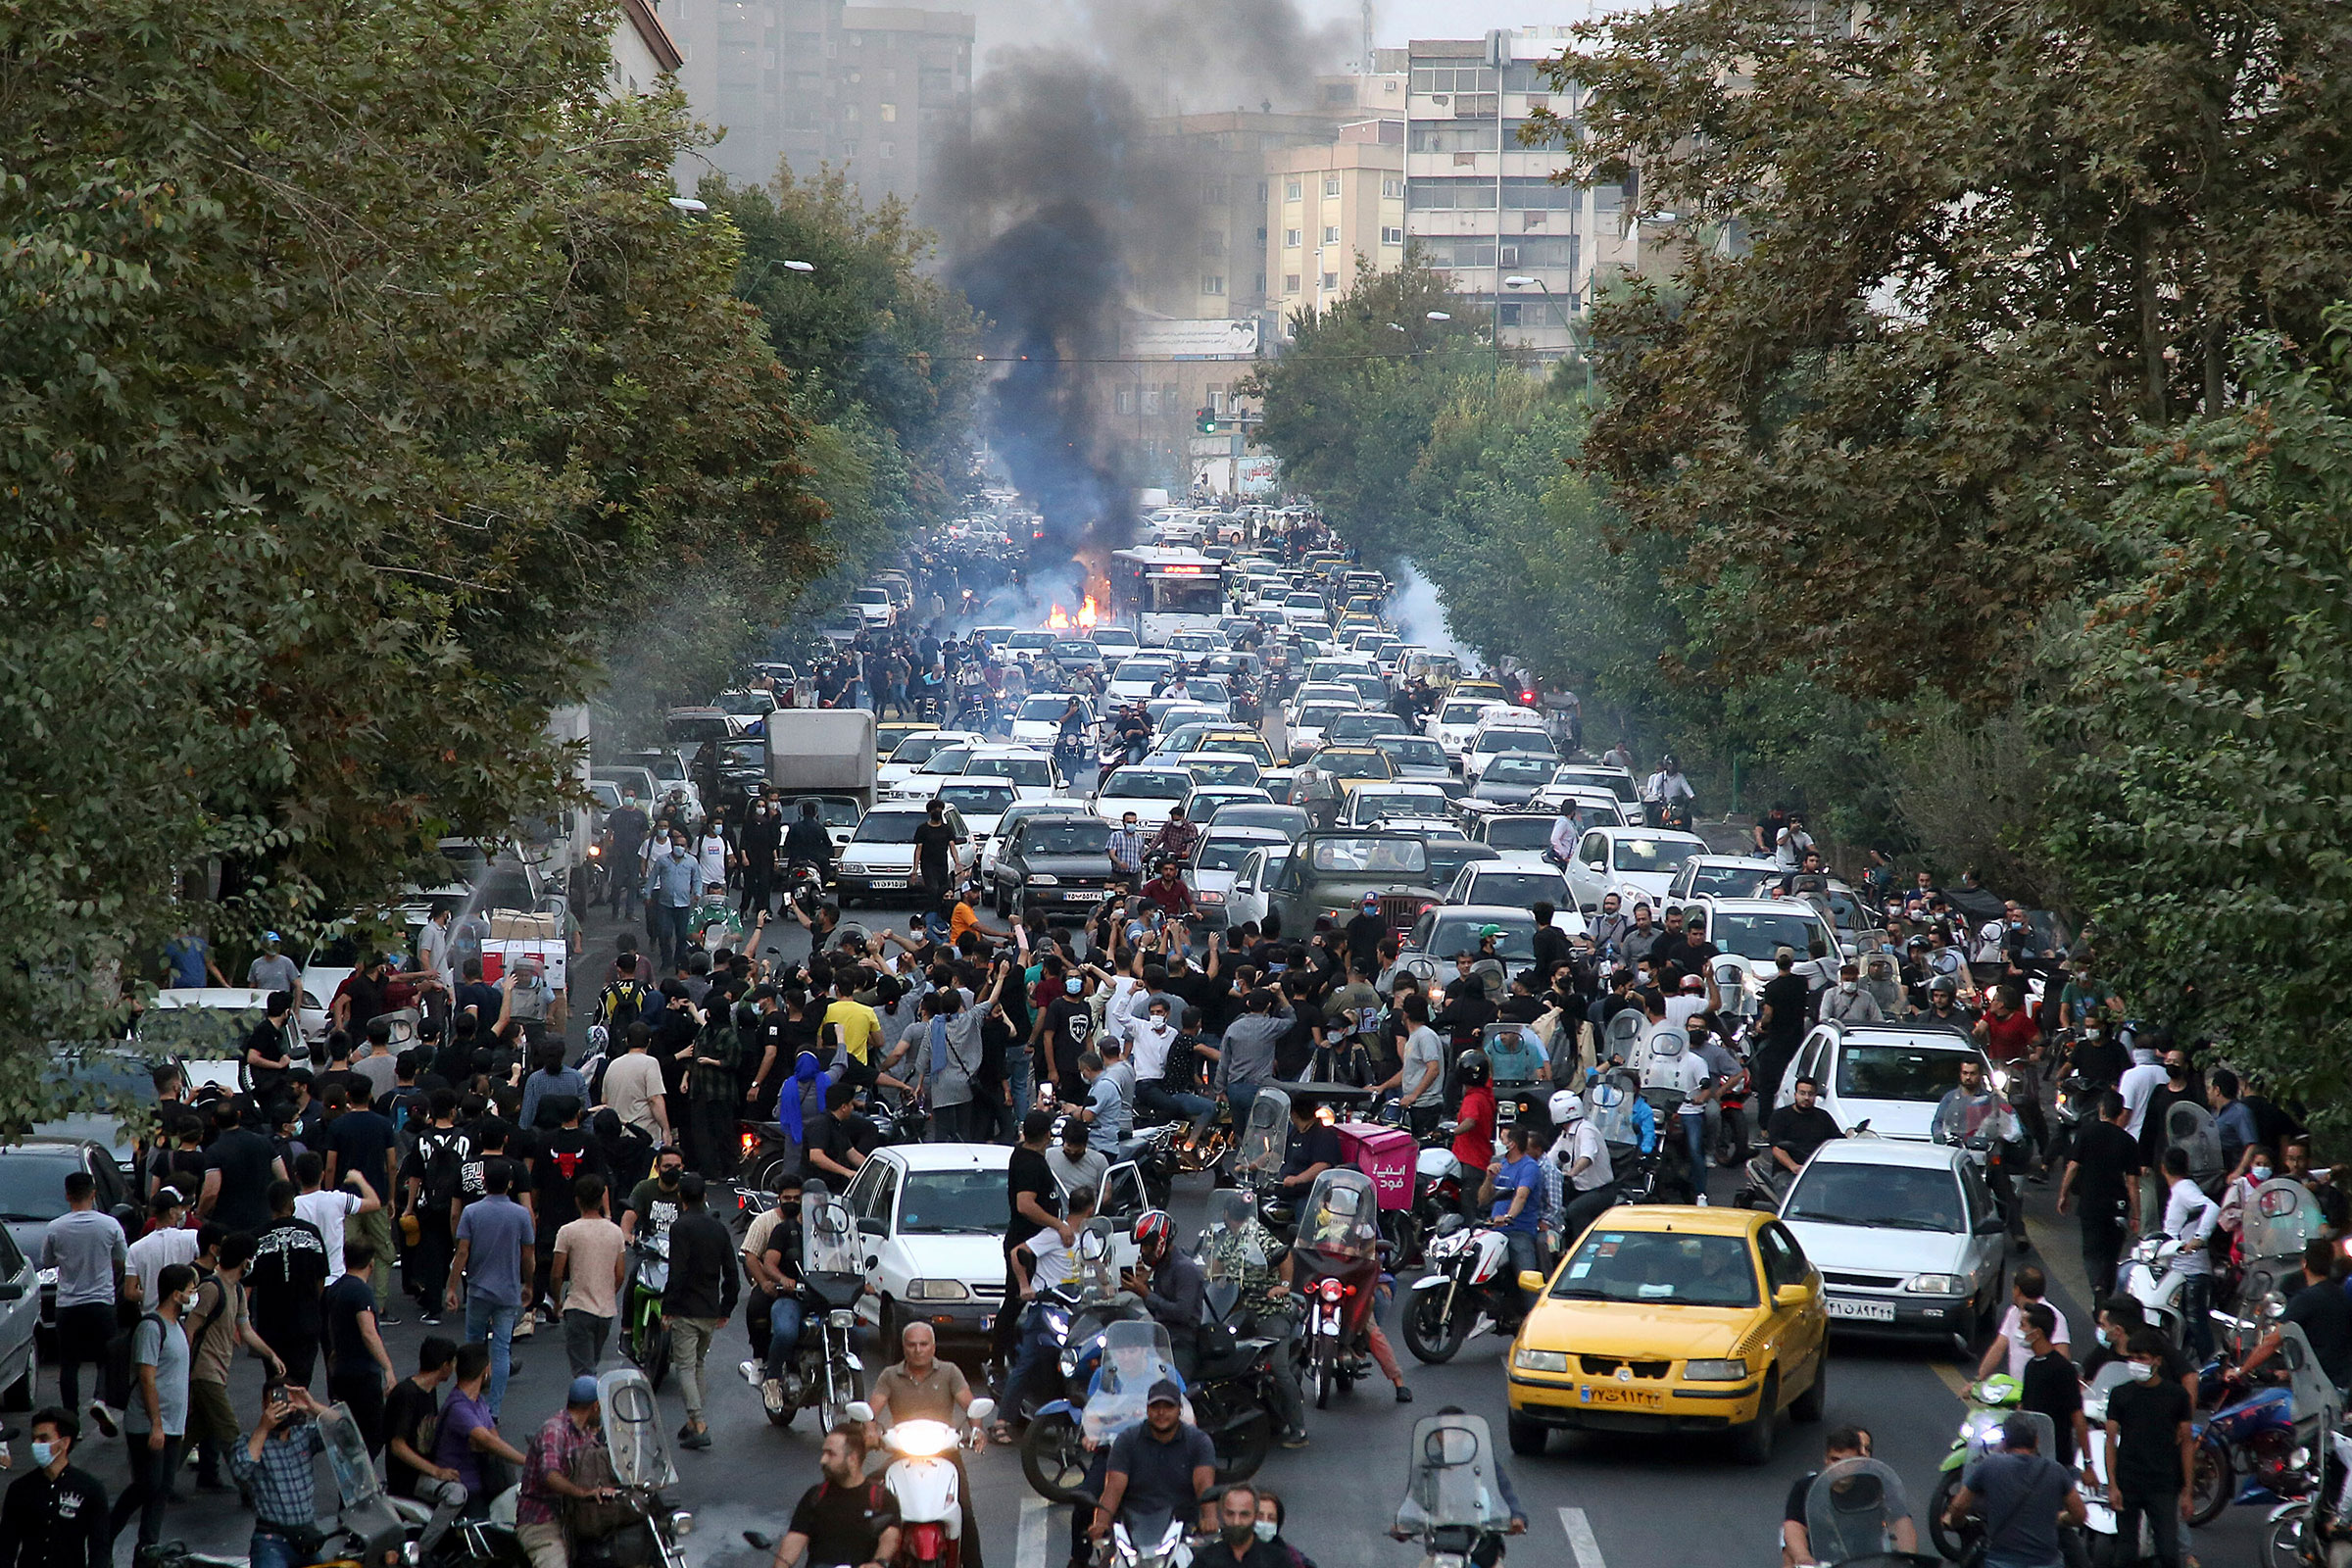 Protesters gather in the streets of Tehran over the death of Mahsa Amini, Sept. 21, 2022. (AP)